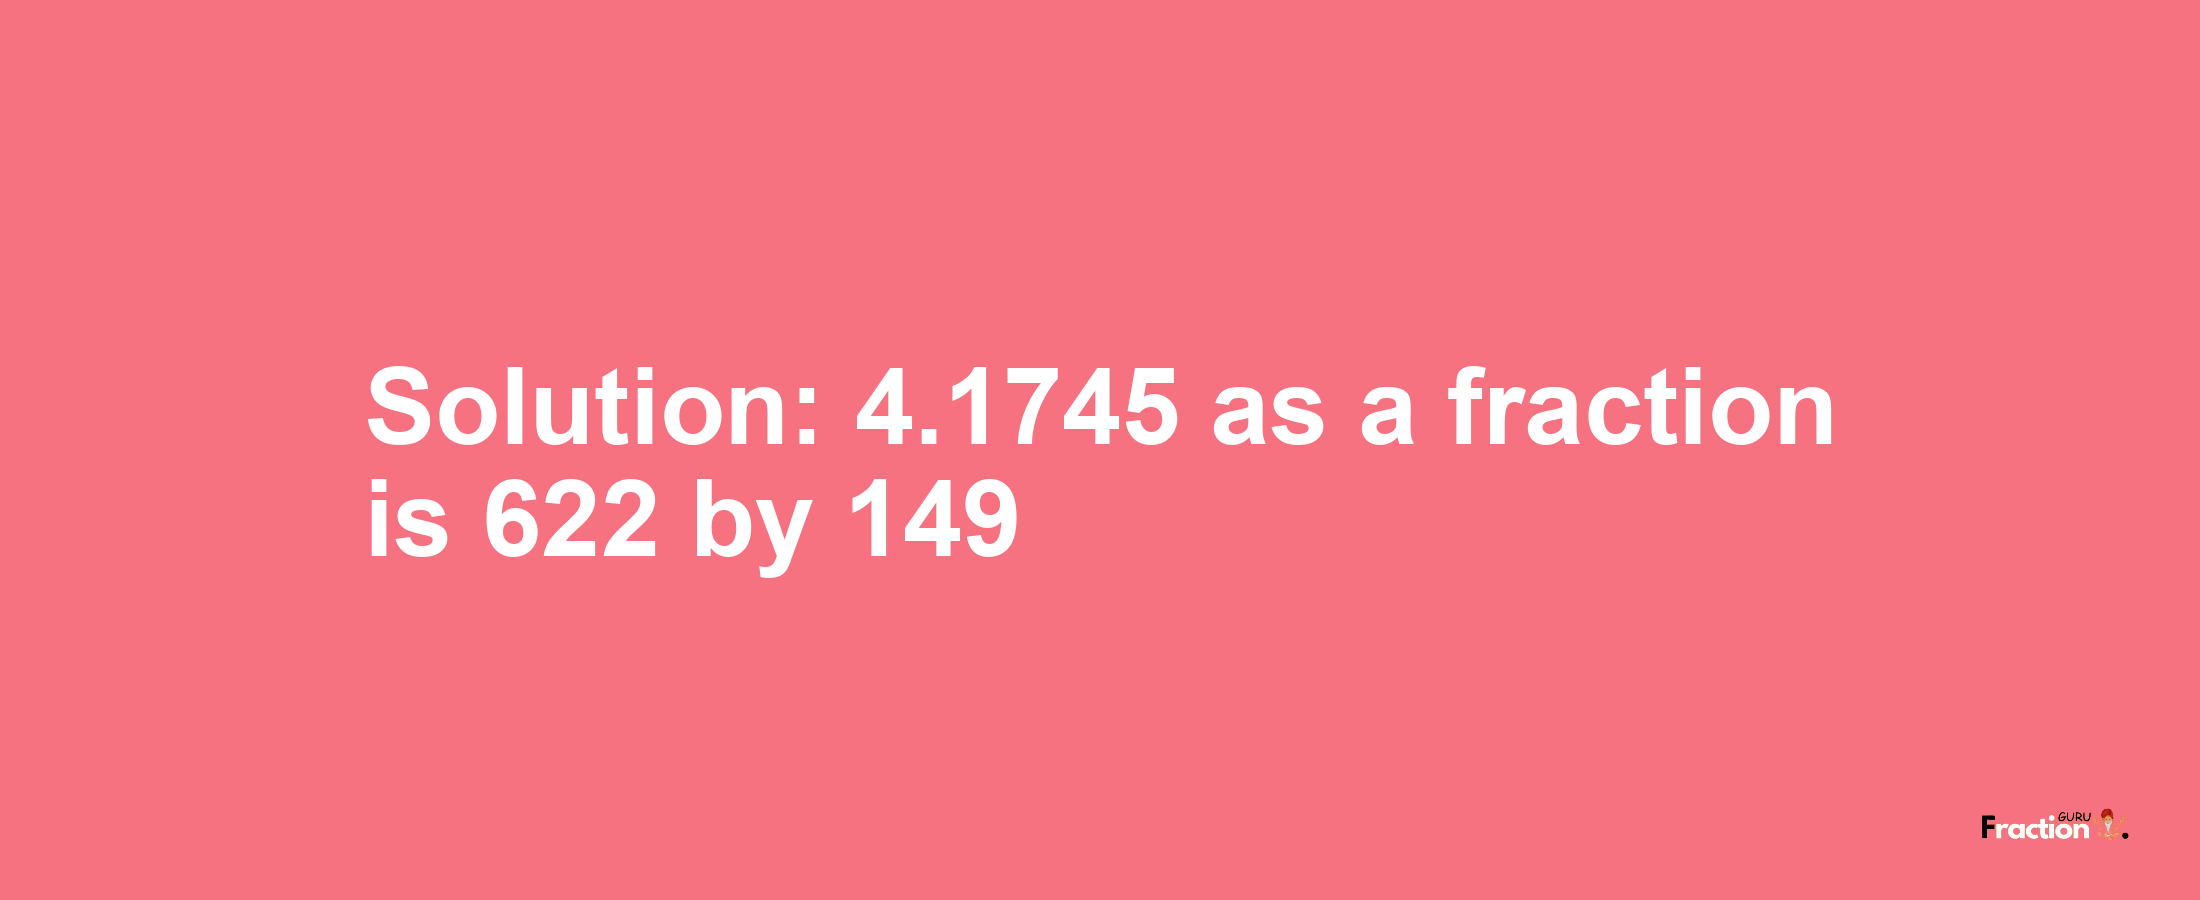 Solution:4.1745 as a fraction is 622/149